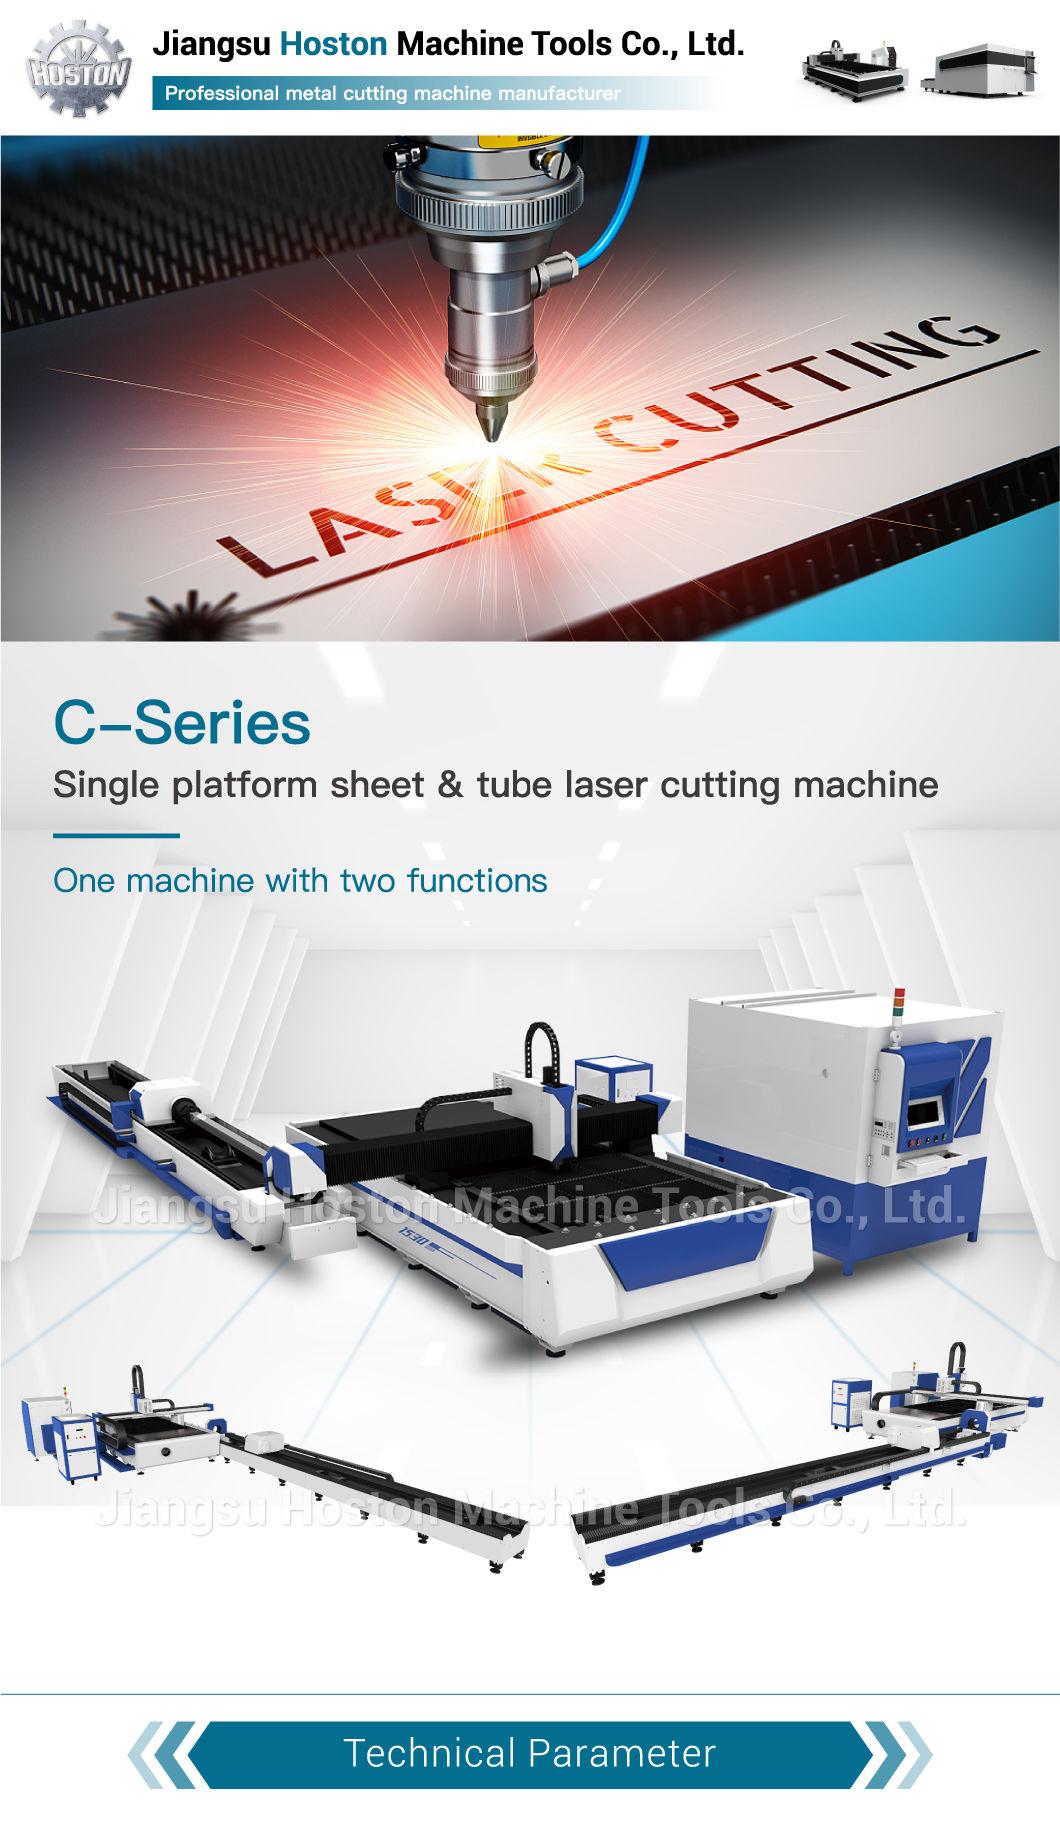 Brand New Professional 2kw Fiber Laser Cutting Machine for 6mm Diameter Pipes